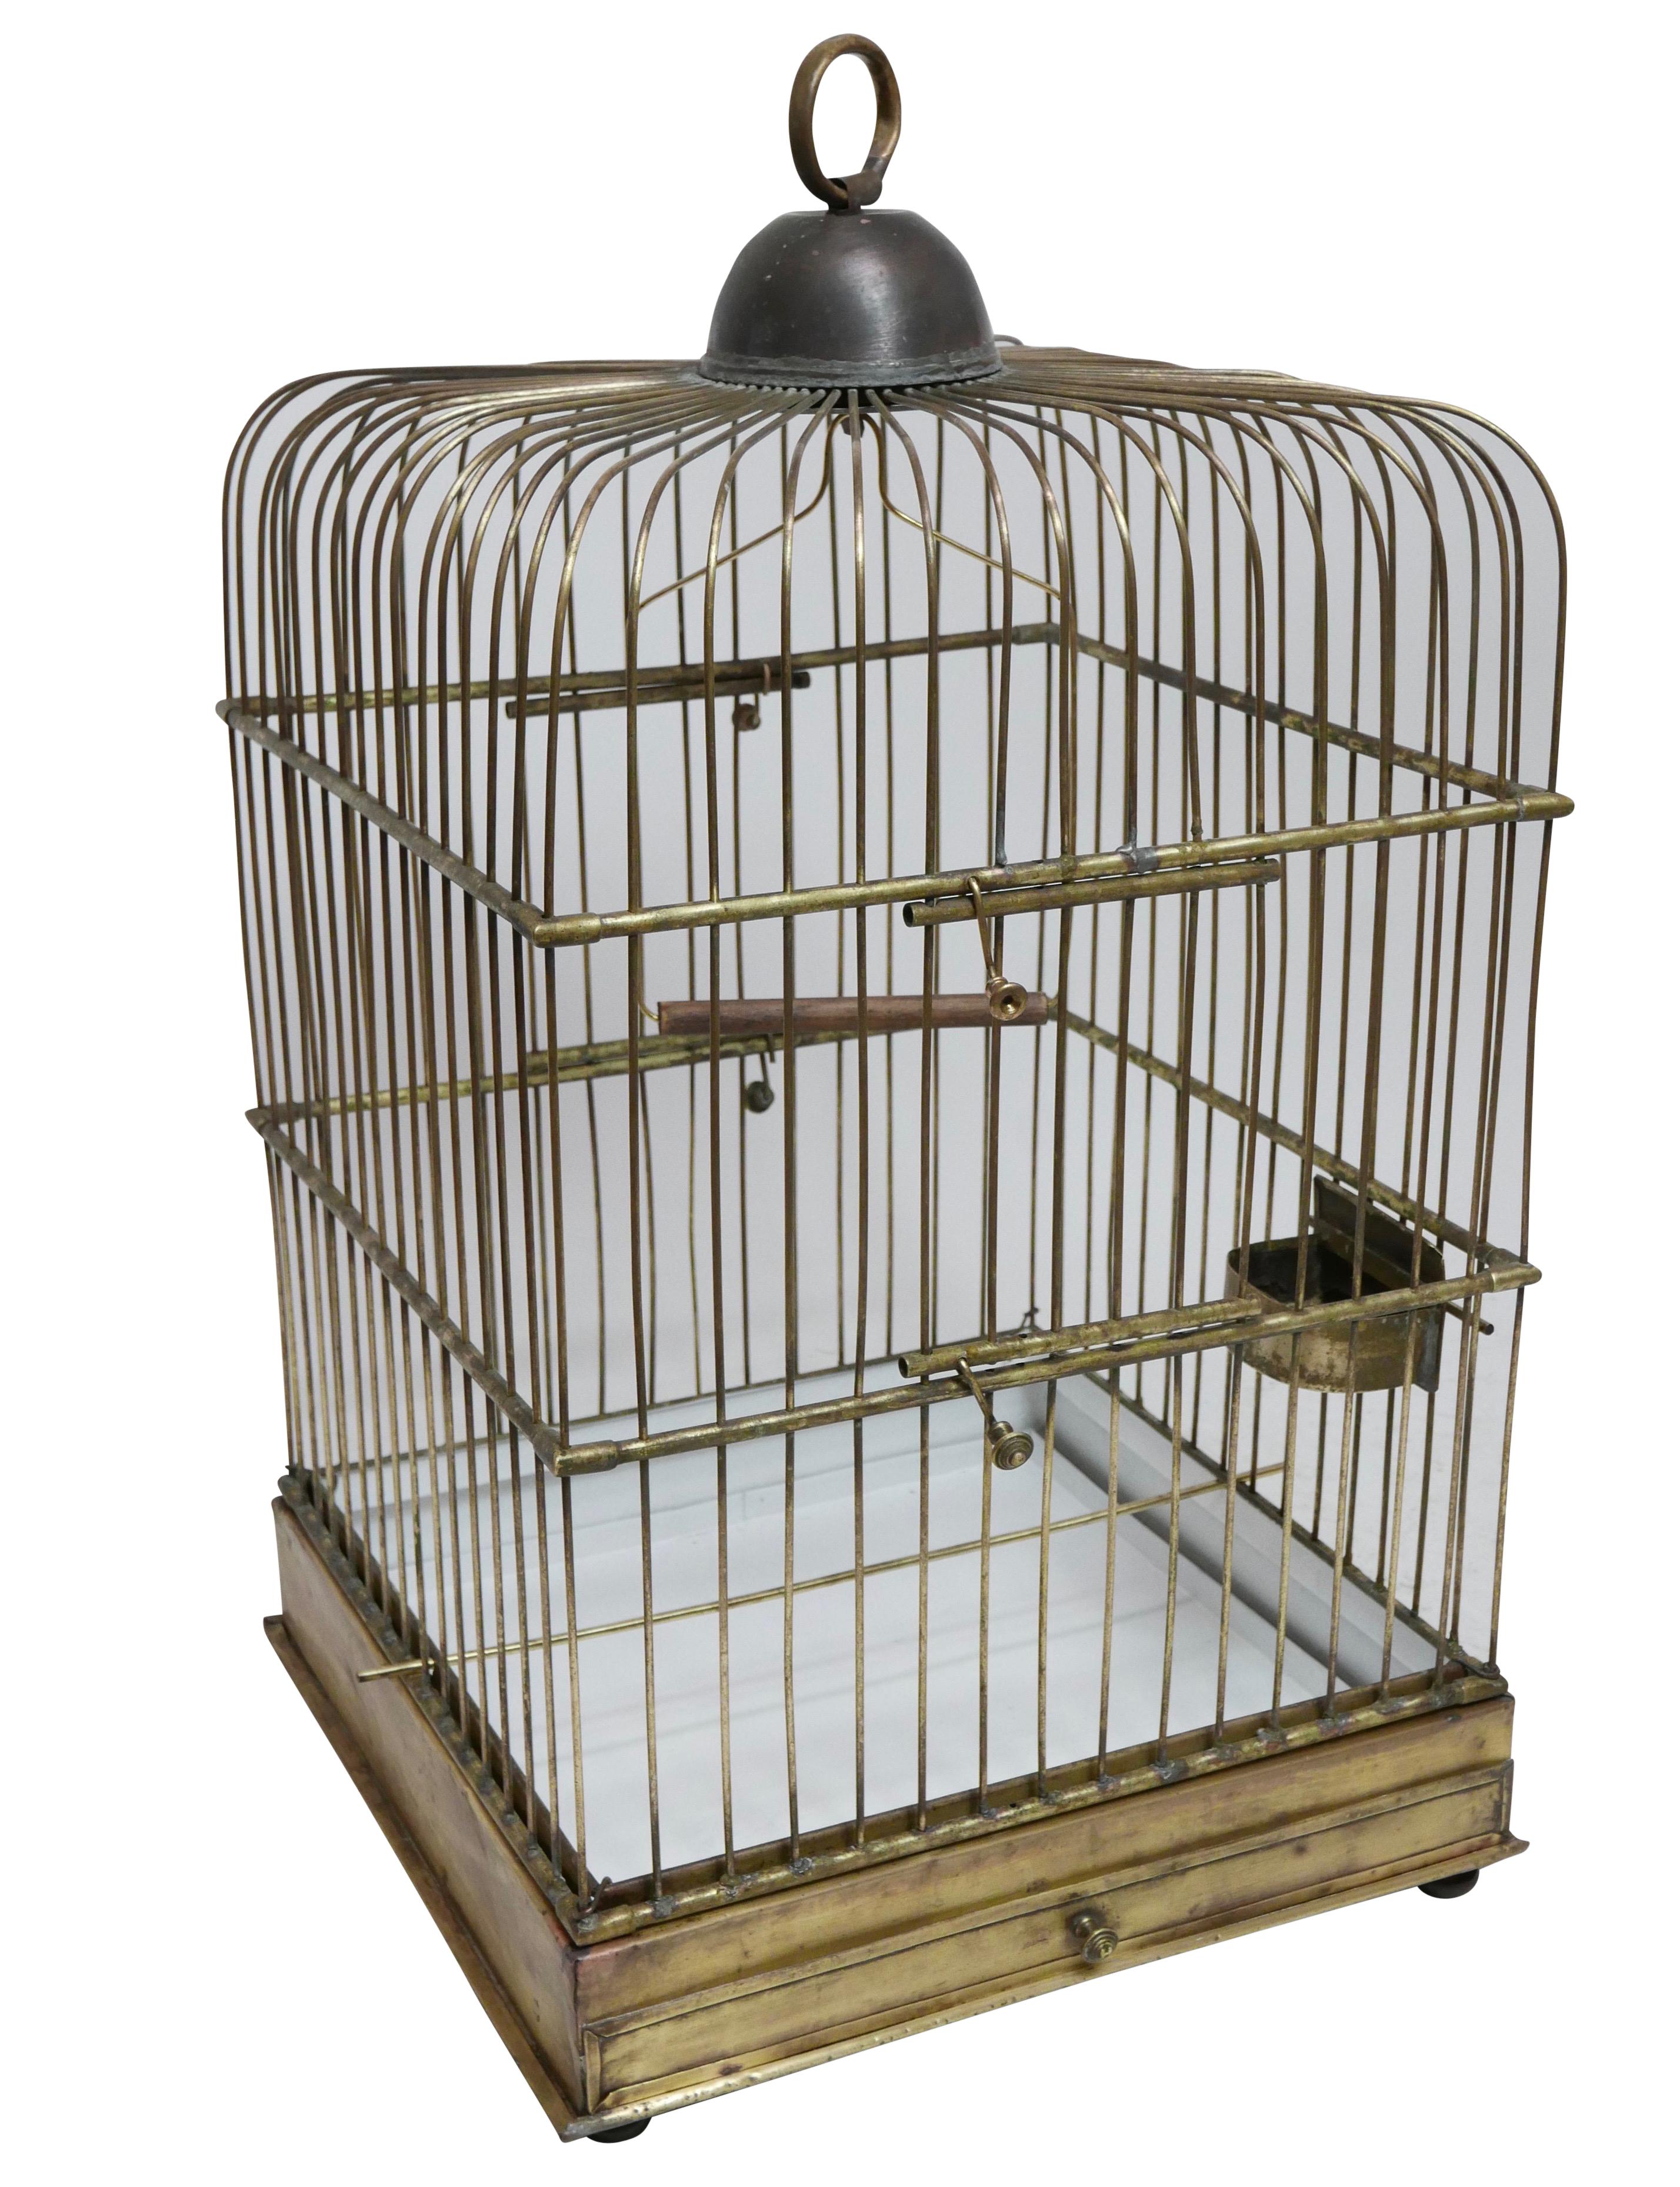 A solid brass parrot birdcage, having dual access doors, a center swing and several stationary perches along with brass twin bowl feeder and a pull out / pull-out drawer, sitting on four bun feet,
late 19th century.